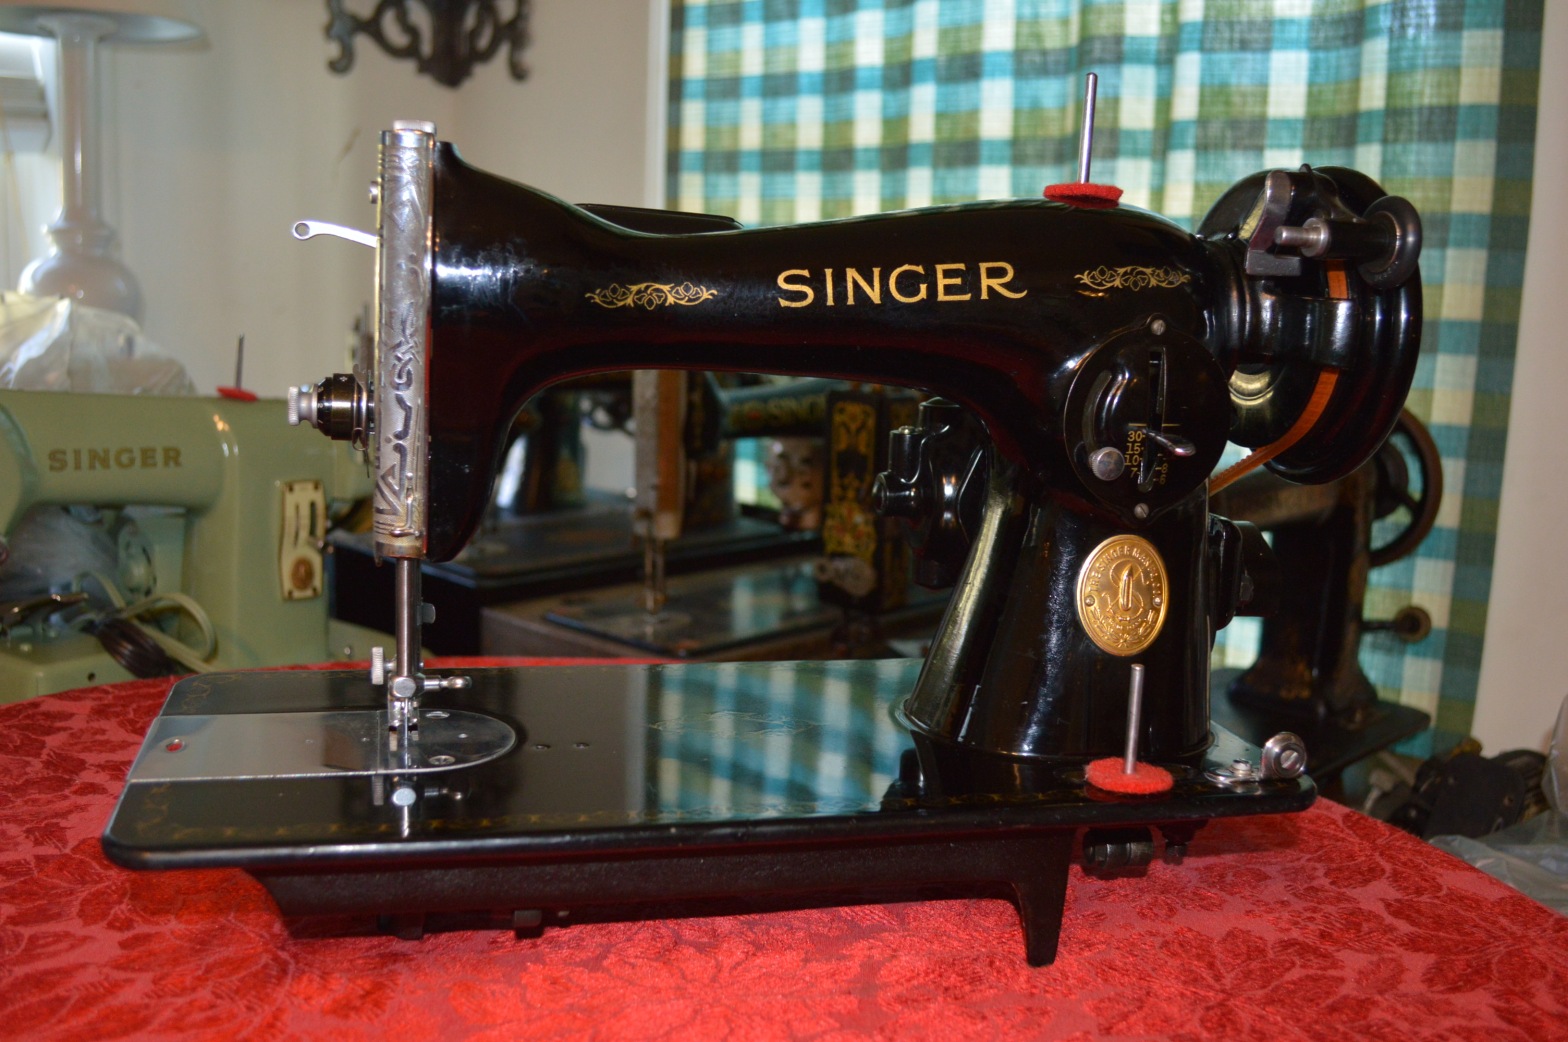 What is the value of your vintage Singer sewing machine? 